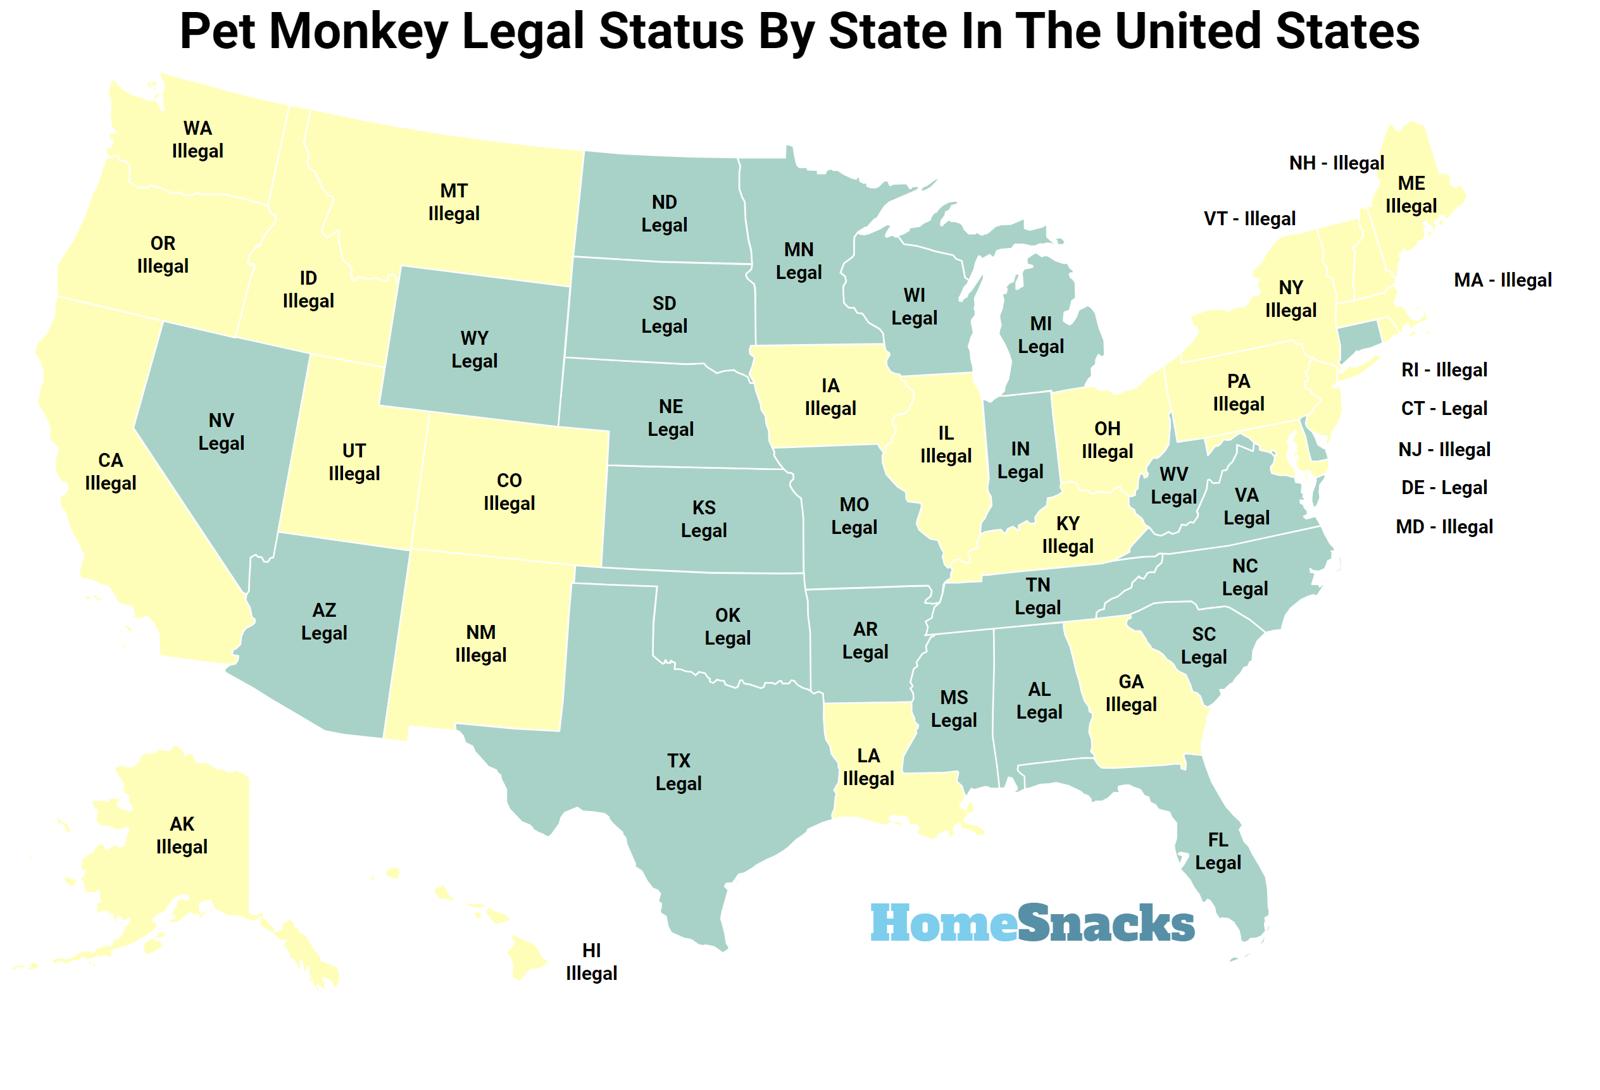 Pet Monkey Legal Status By State In The United States